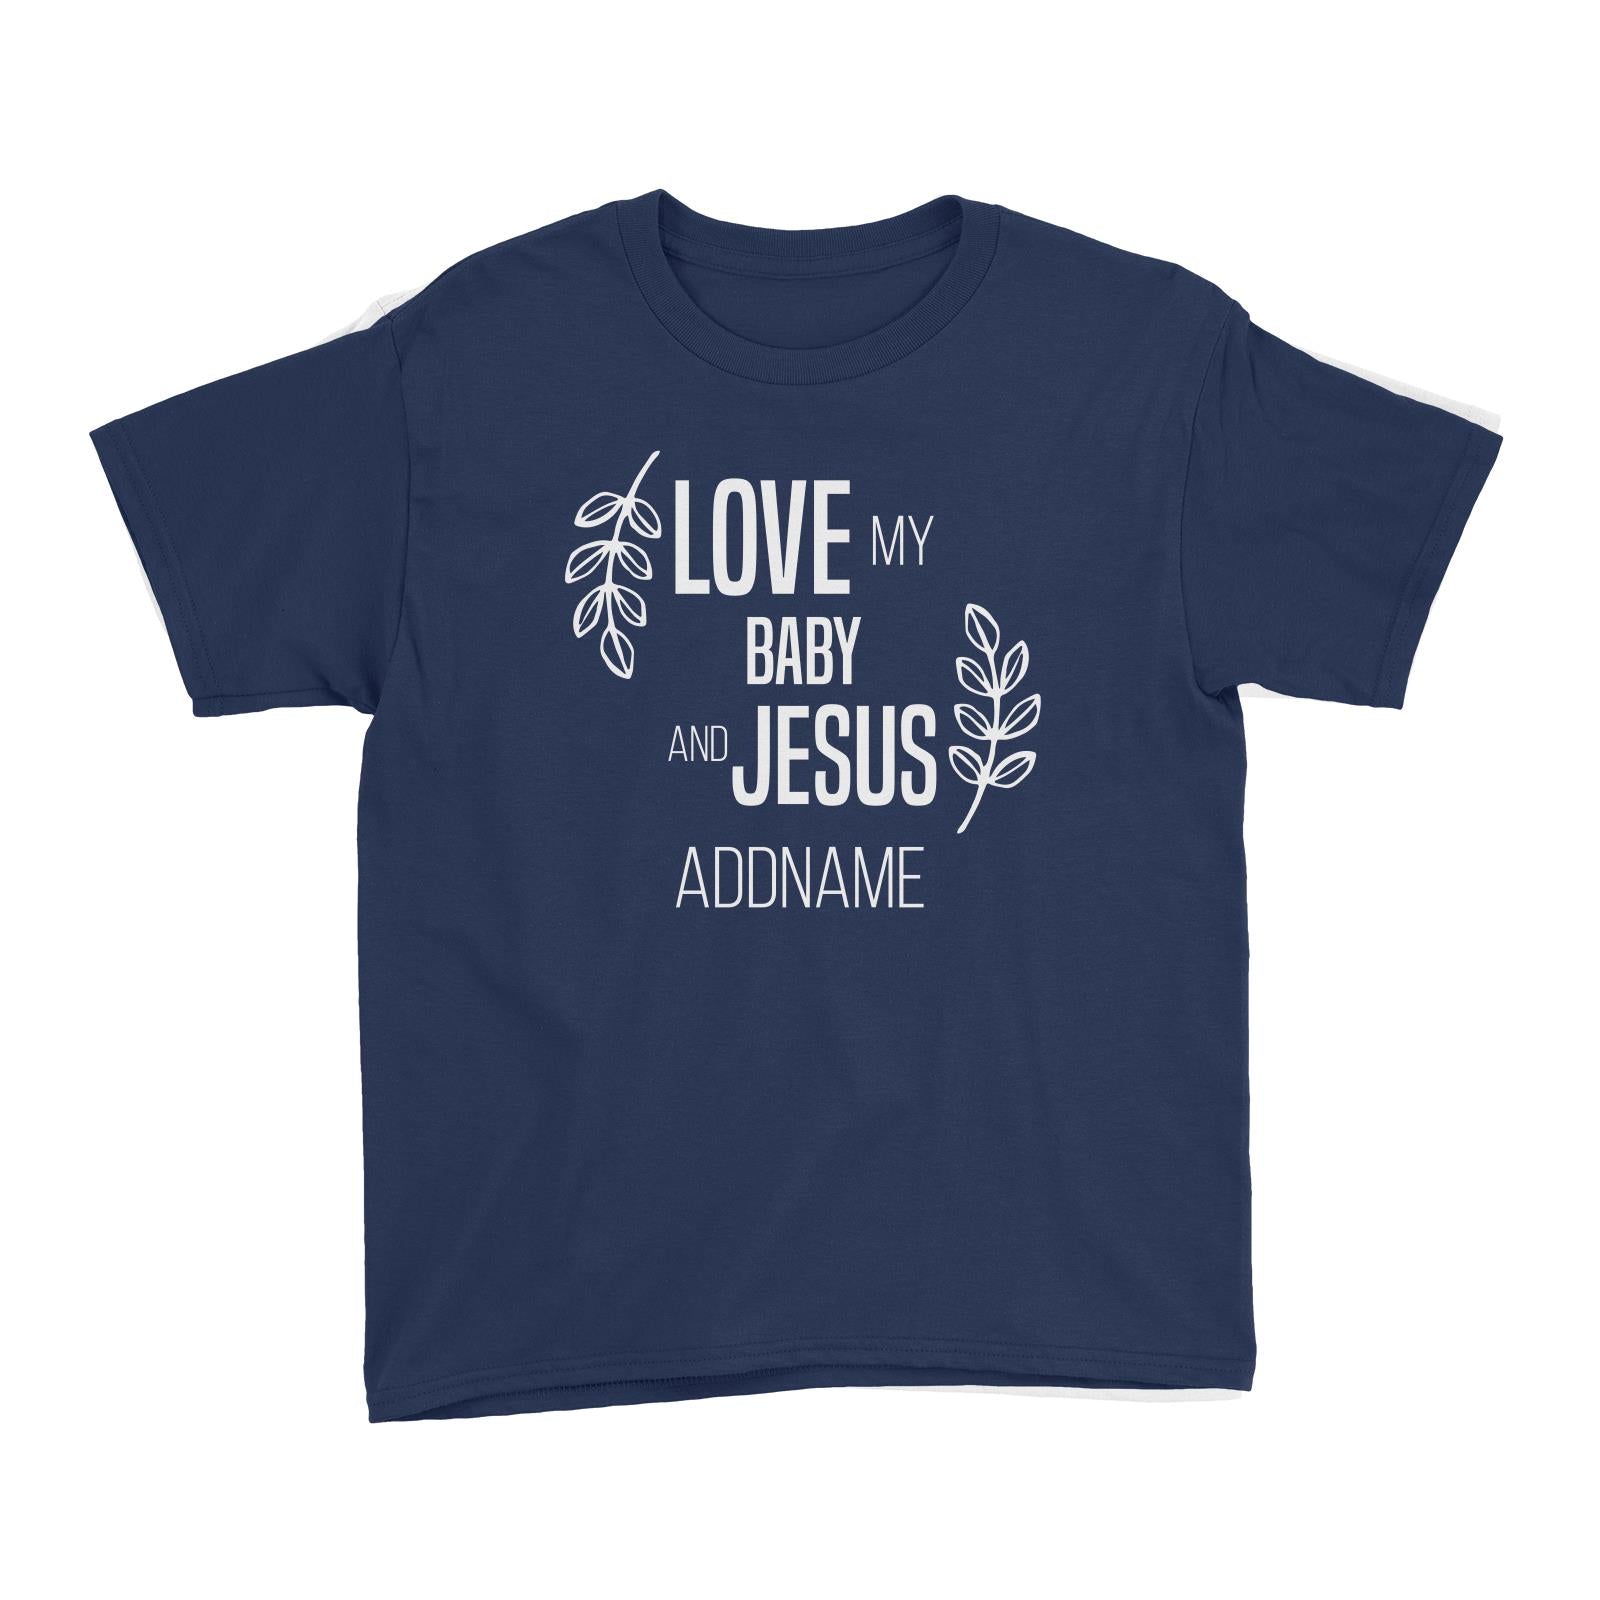 Christian Series Love My Baby And Jesus Addname Kid's T-Shirt